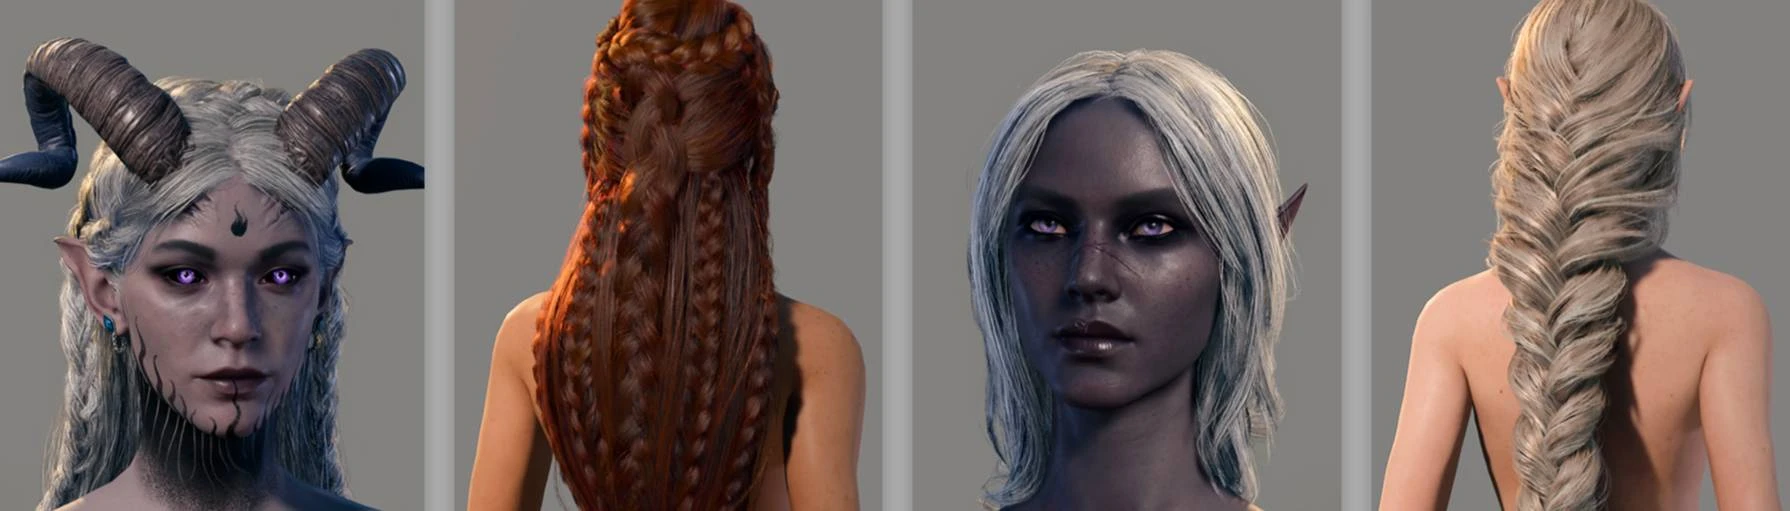 Elf girl in Characters - UE Marketplace